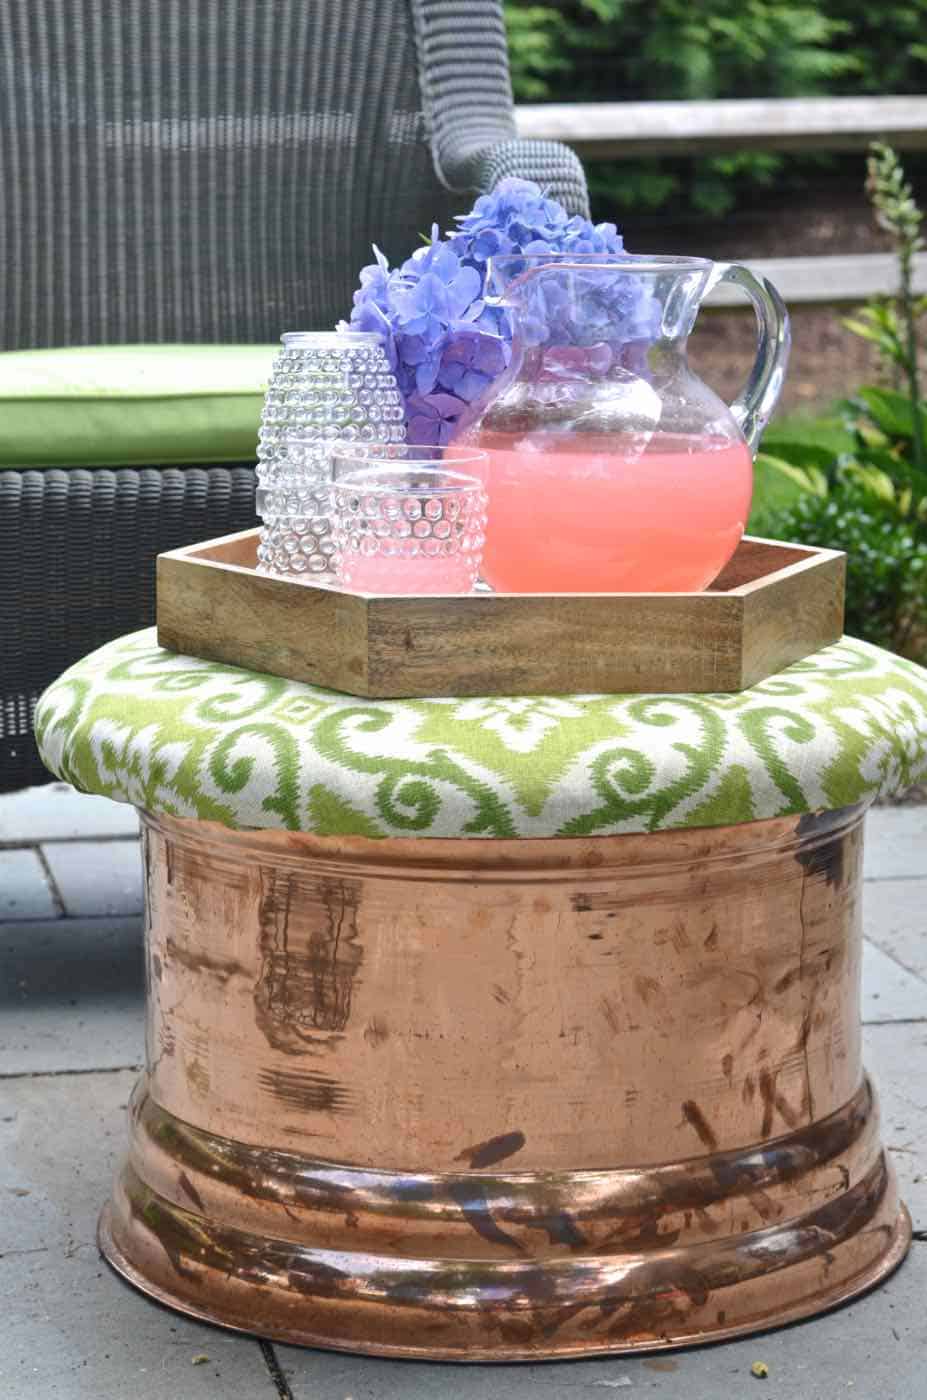 This copper garden hose cover got a makeover as an upholstered storage ottoman for our patio.